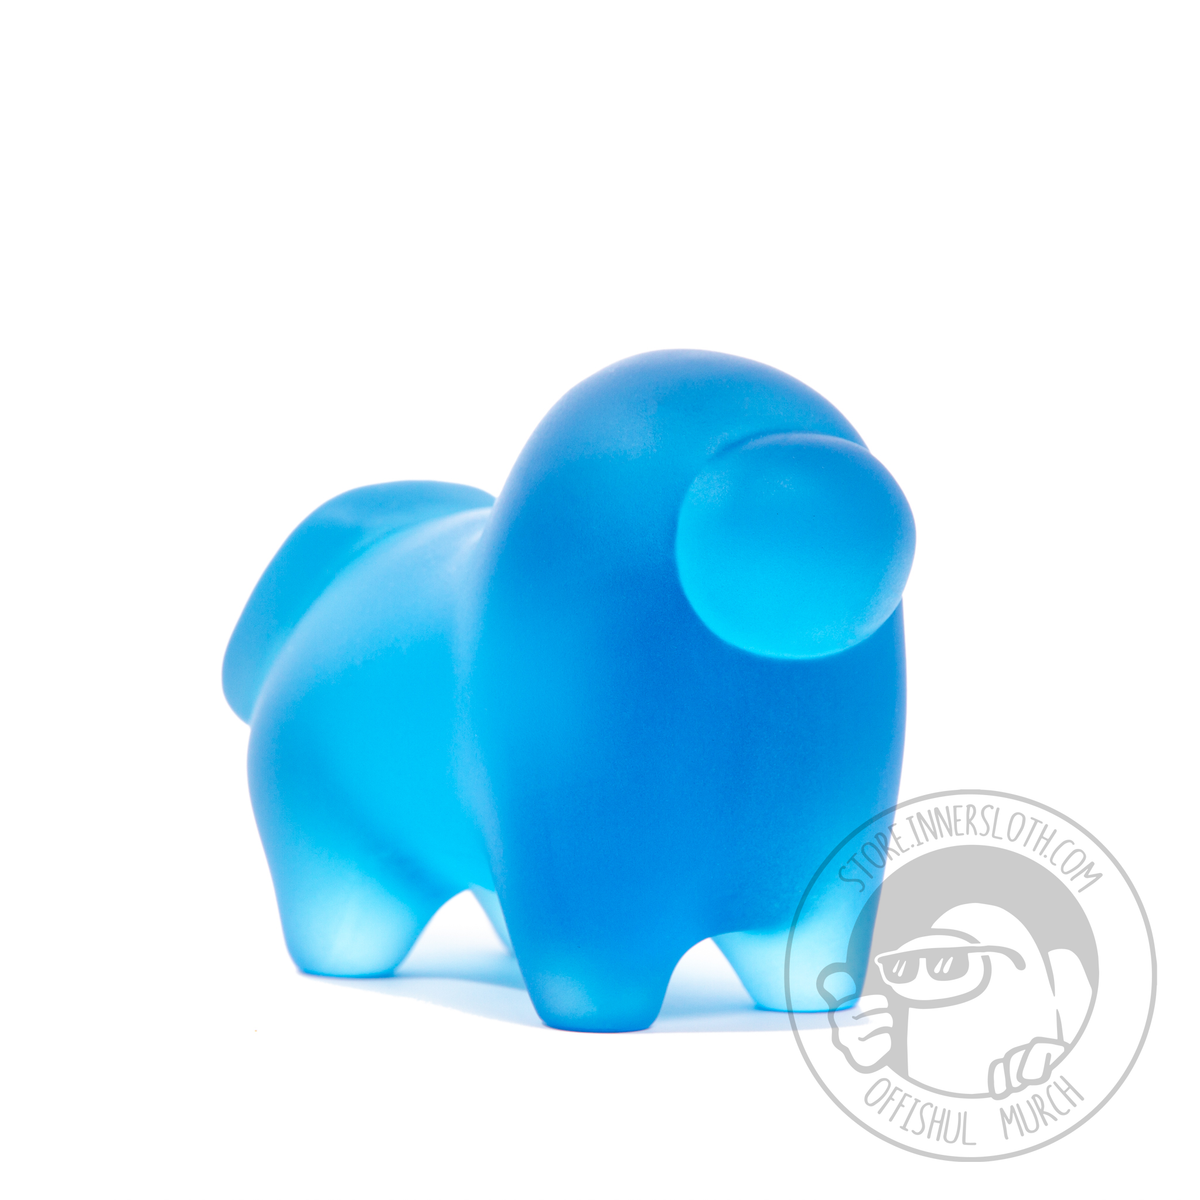 A photographed 3/4 of a Horse-shaped Crewmate figurine made of translucent blue resin.